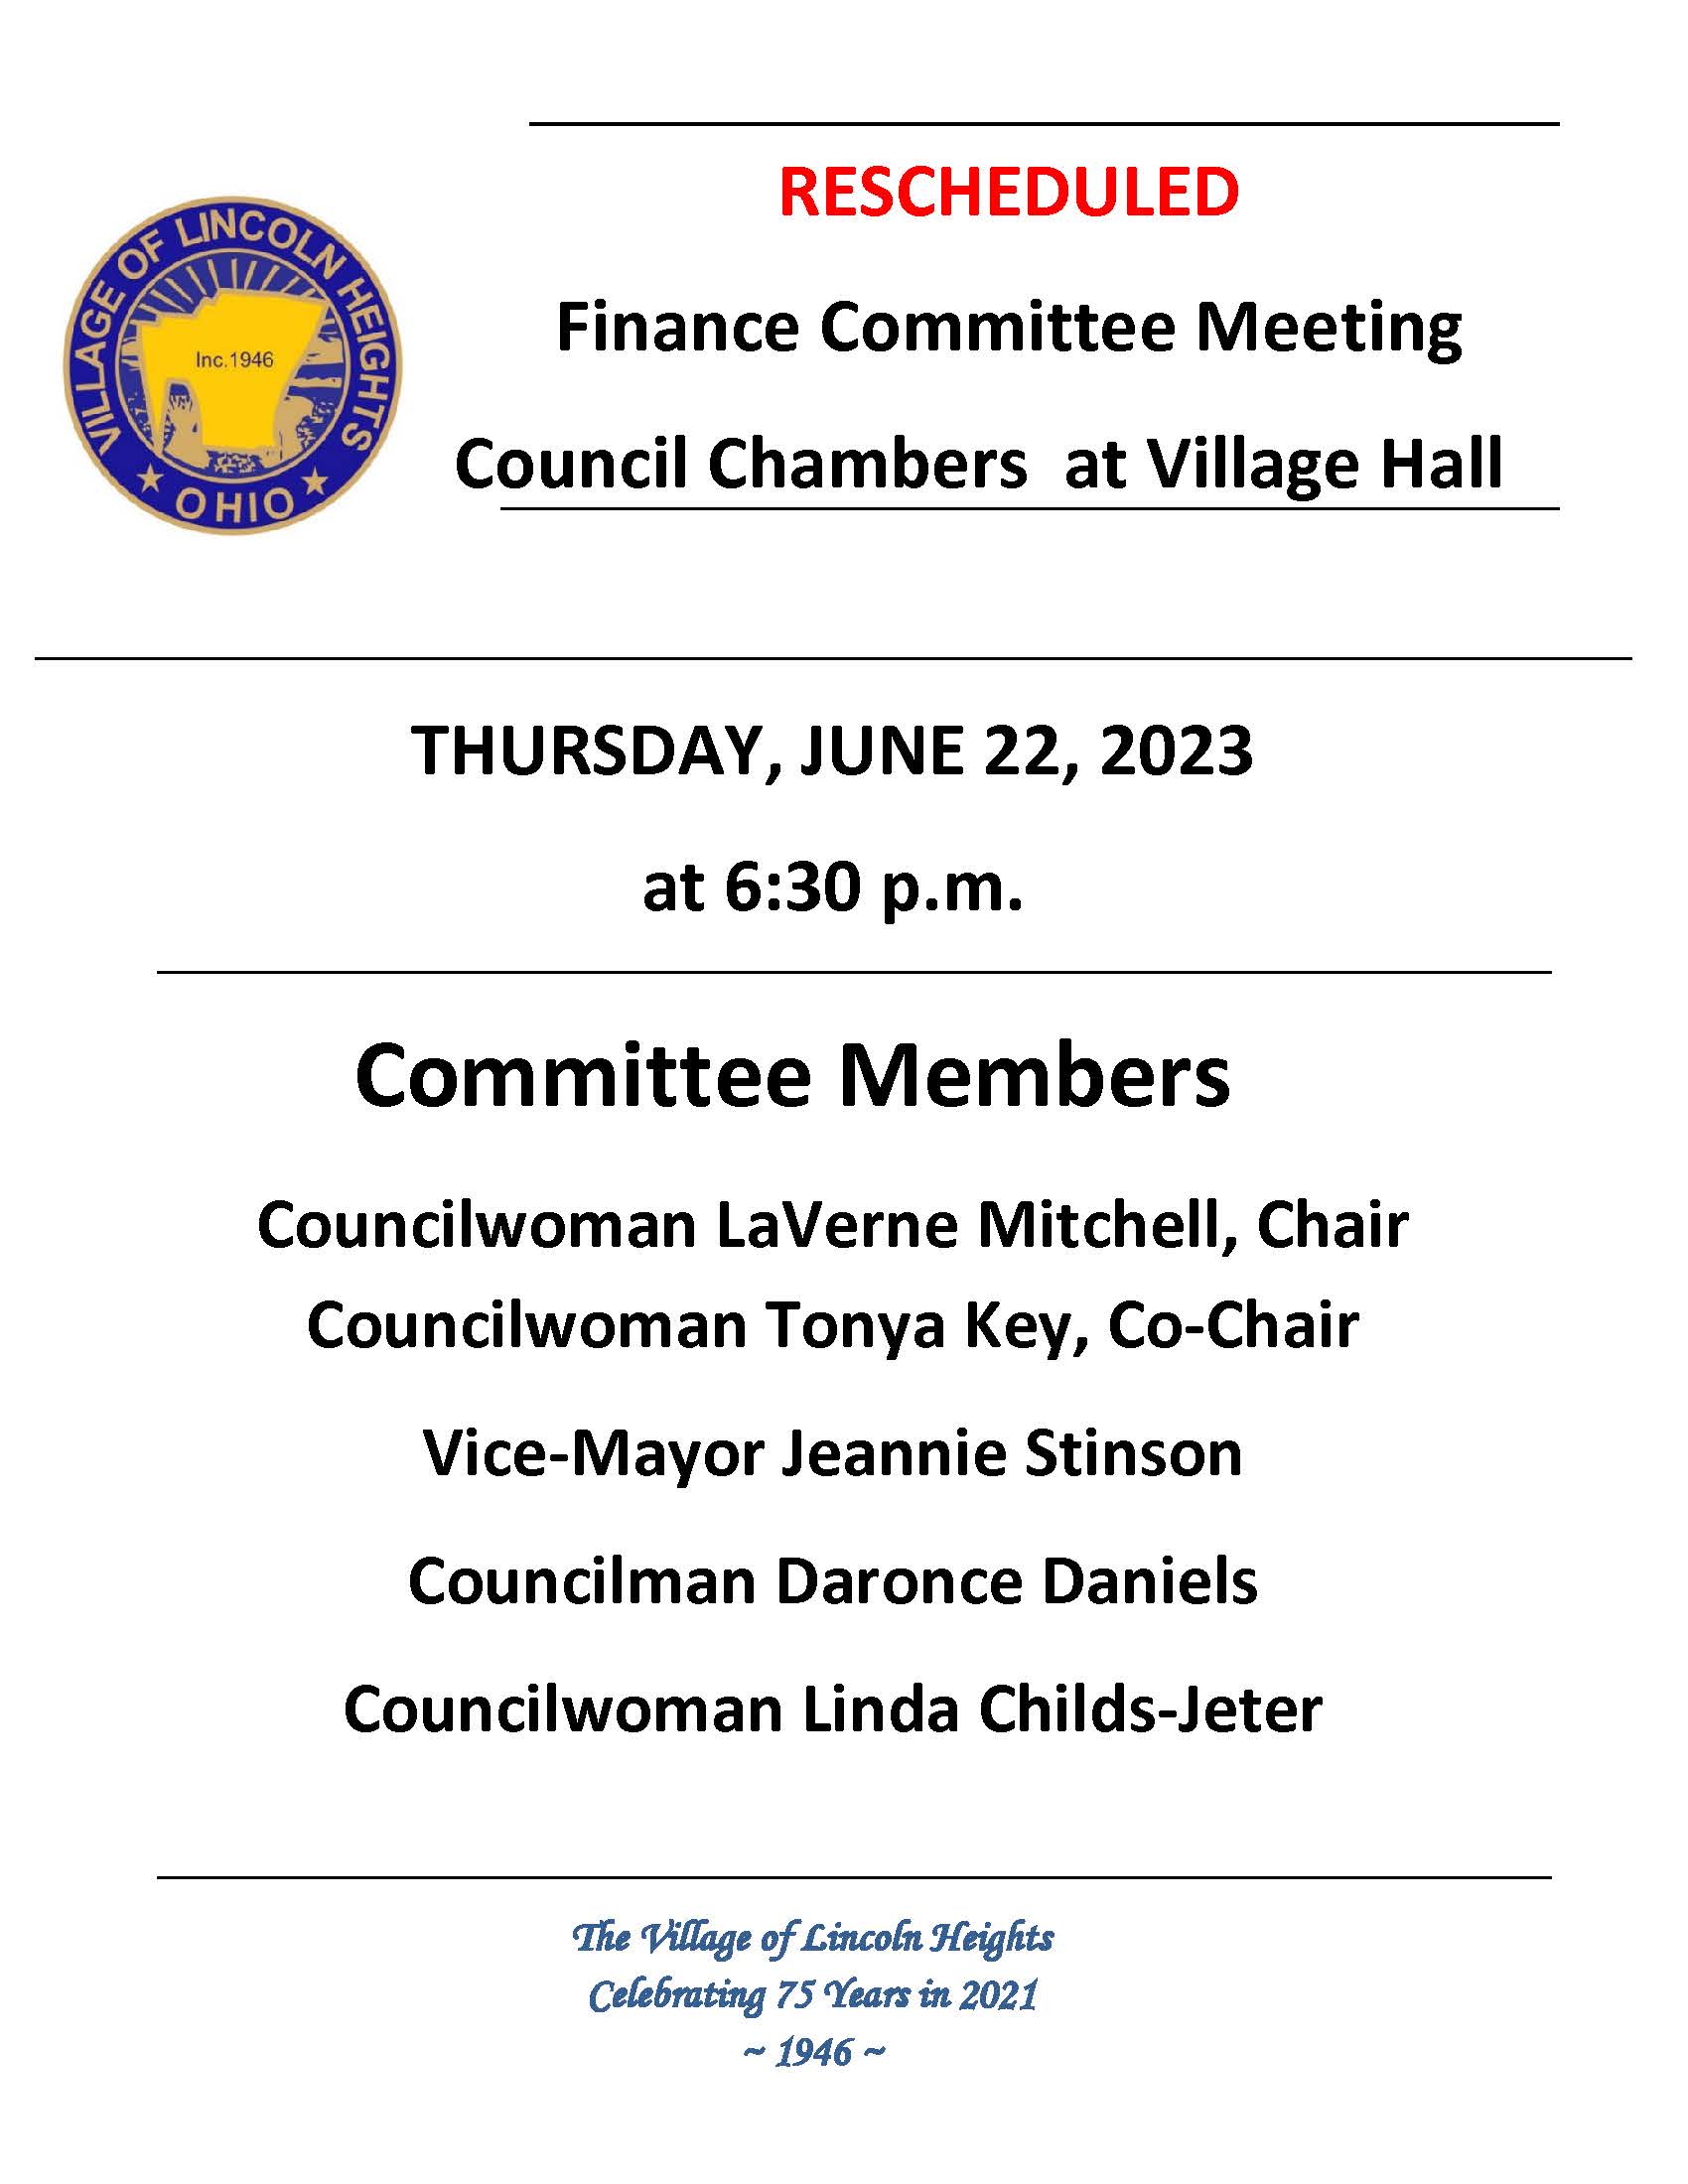 Finance Committee Meeting Announcement 06-22-2023